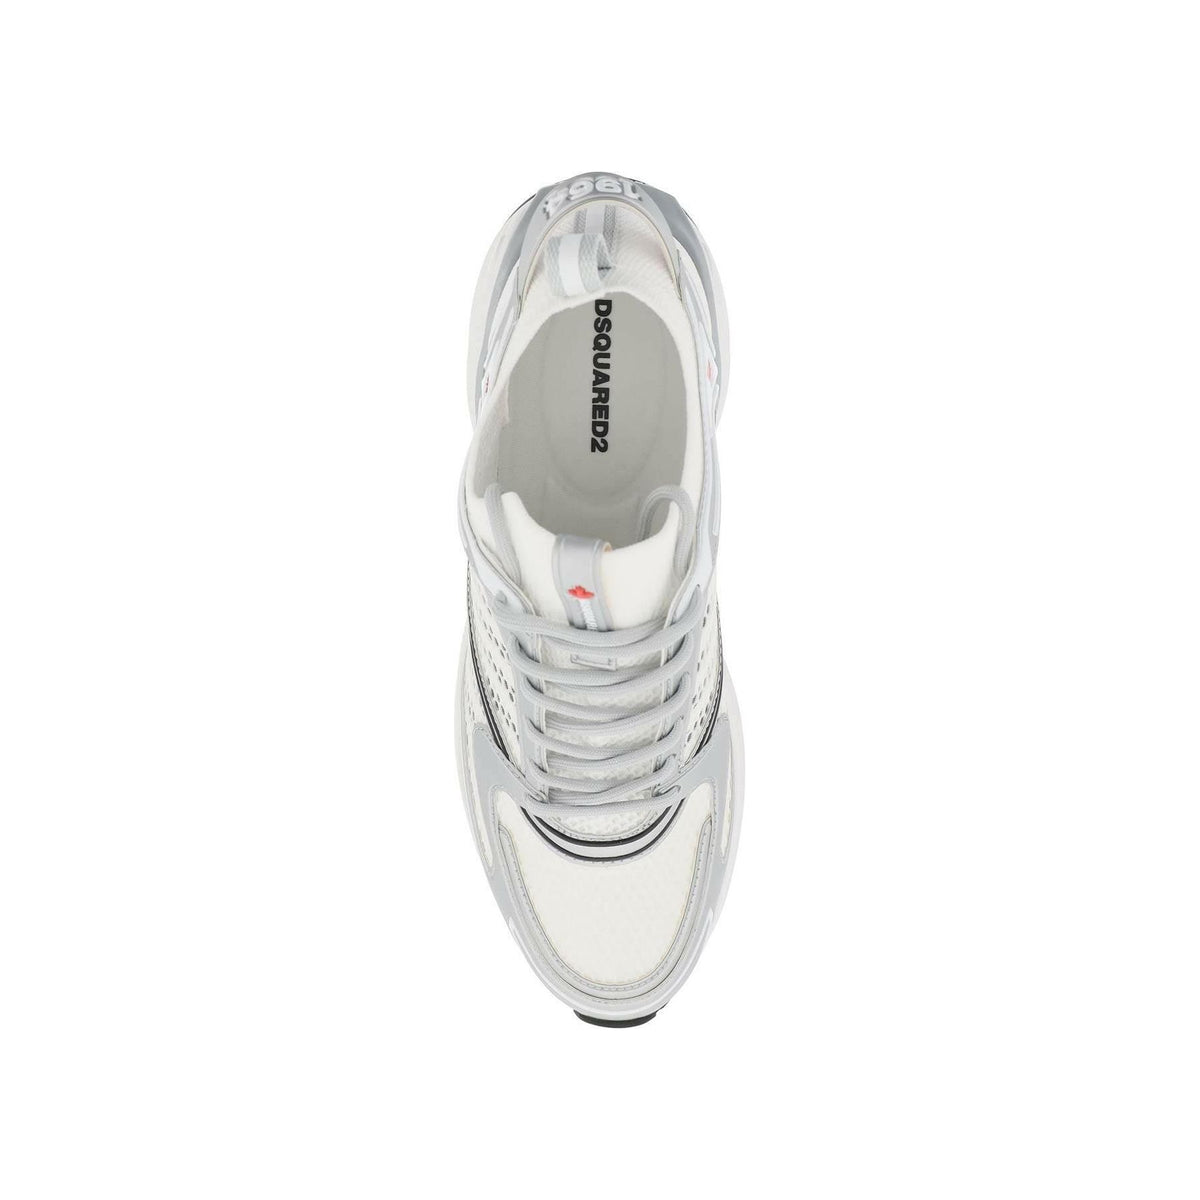 White and Silver Dash Running Sneakers DSQUARED2 JOHN JULIA.